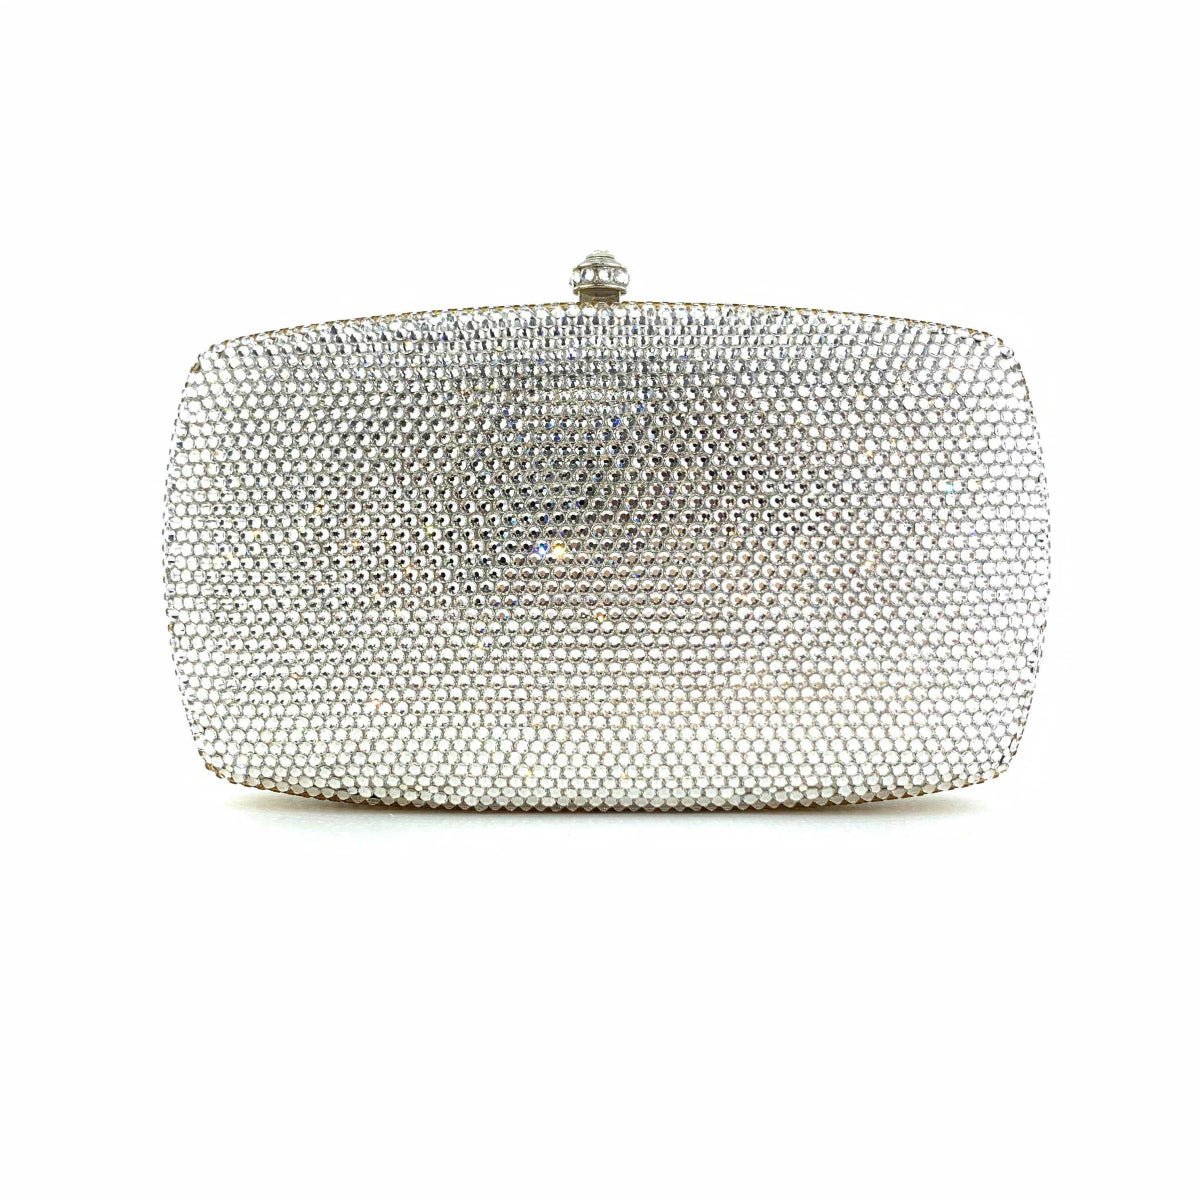 Customized Name Crystal Studded Clutch - Uniquely You Online - Clutch